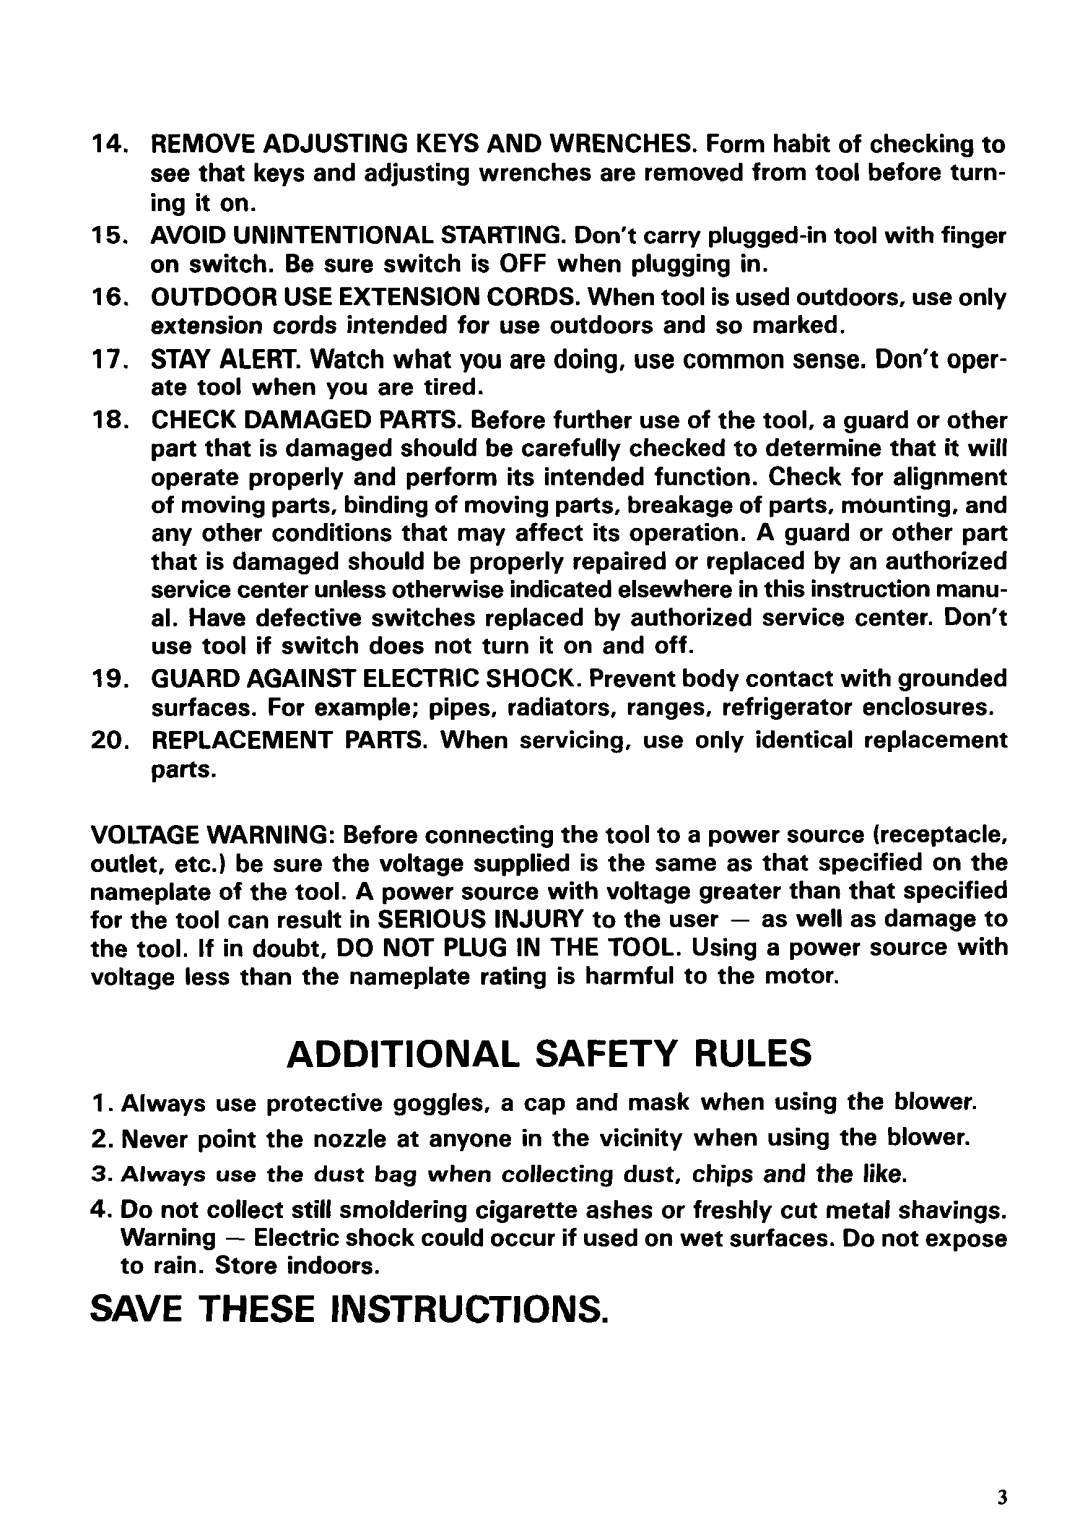 Makita 4014NV instruction manual Additional Safety Rules, Save These Instructions 